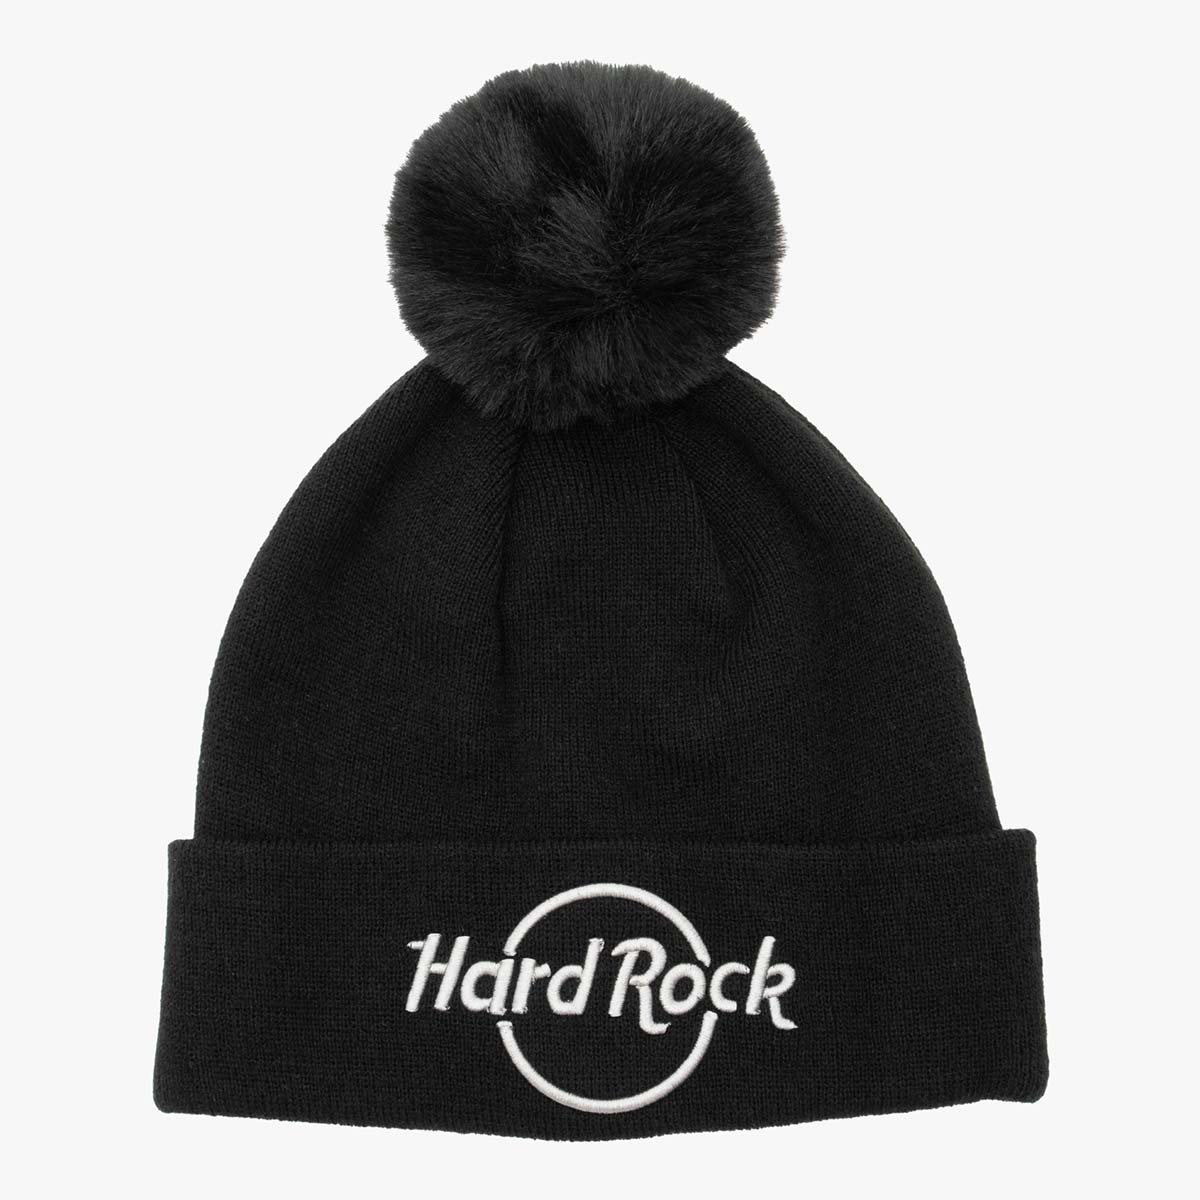 Scarf and Beanie Set in Grey by Hard Rock image number 4